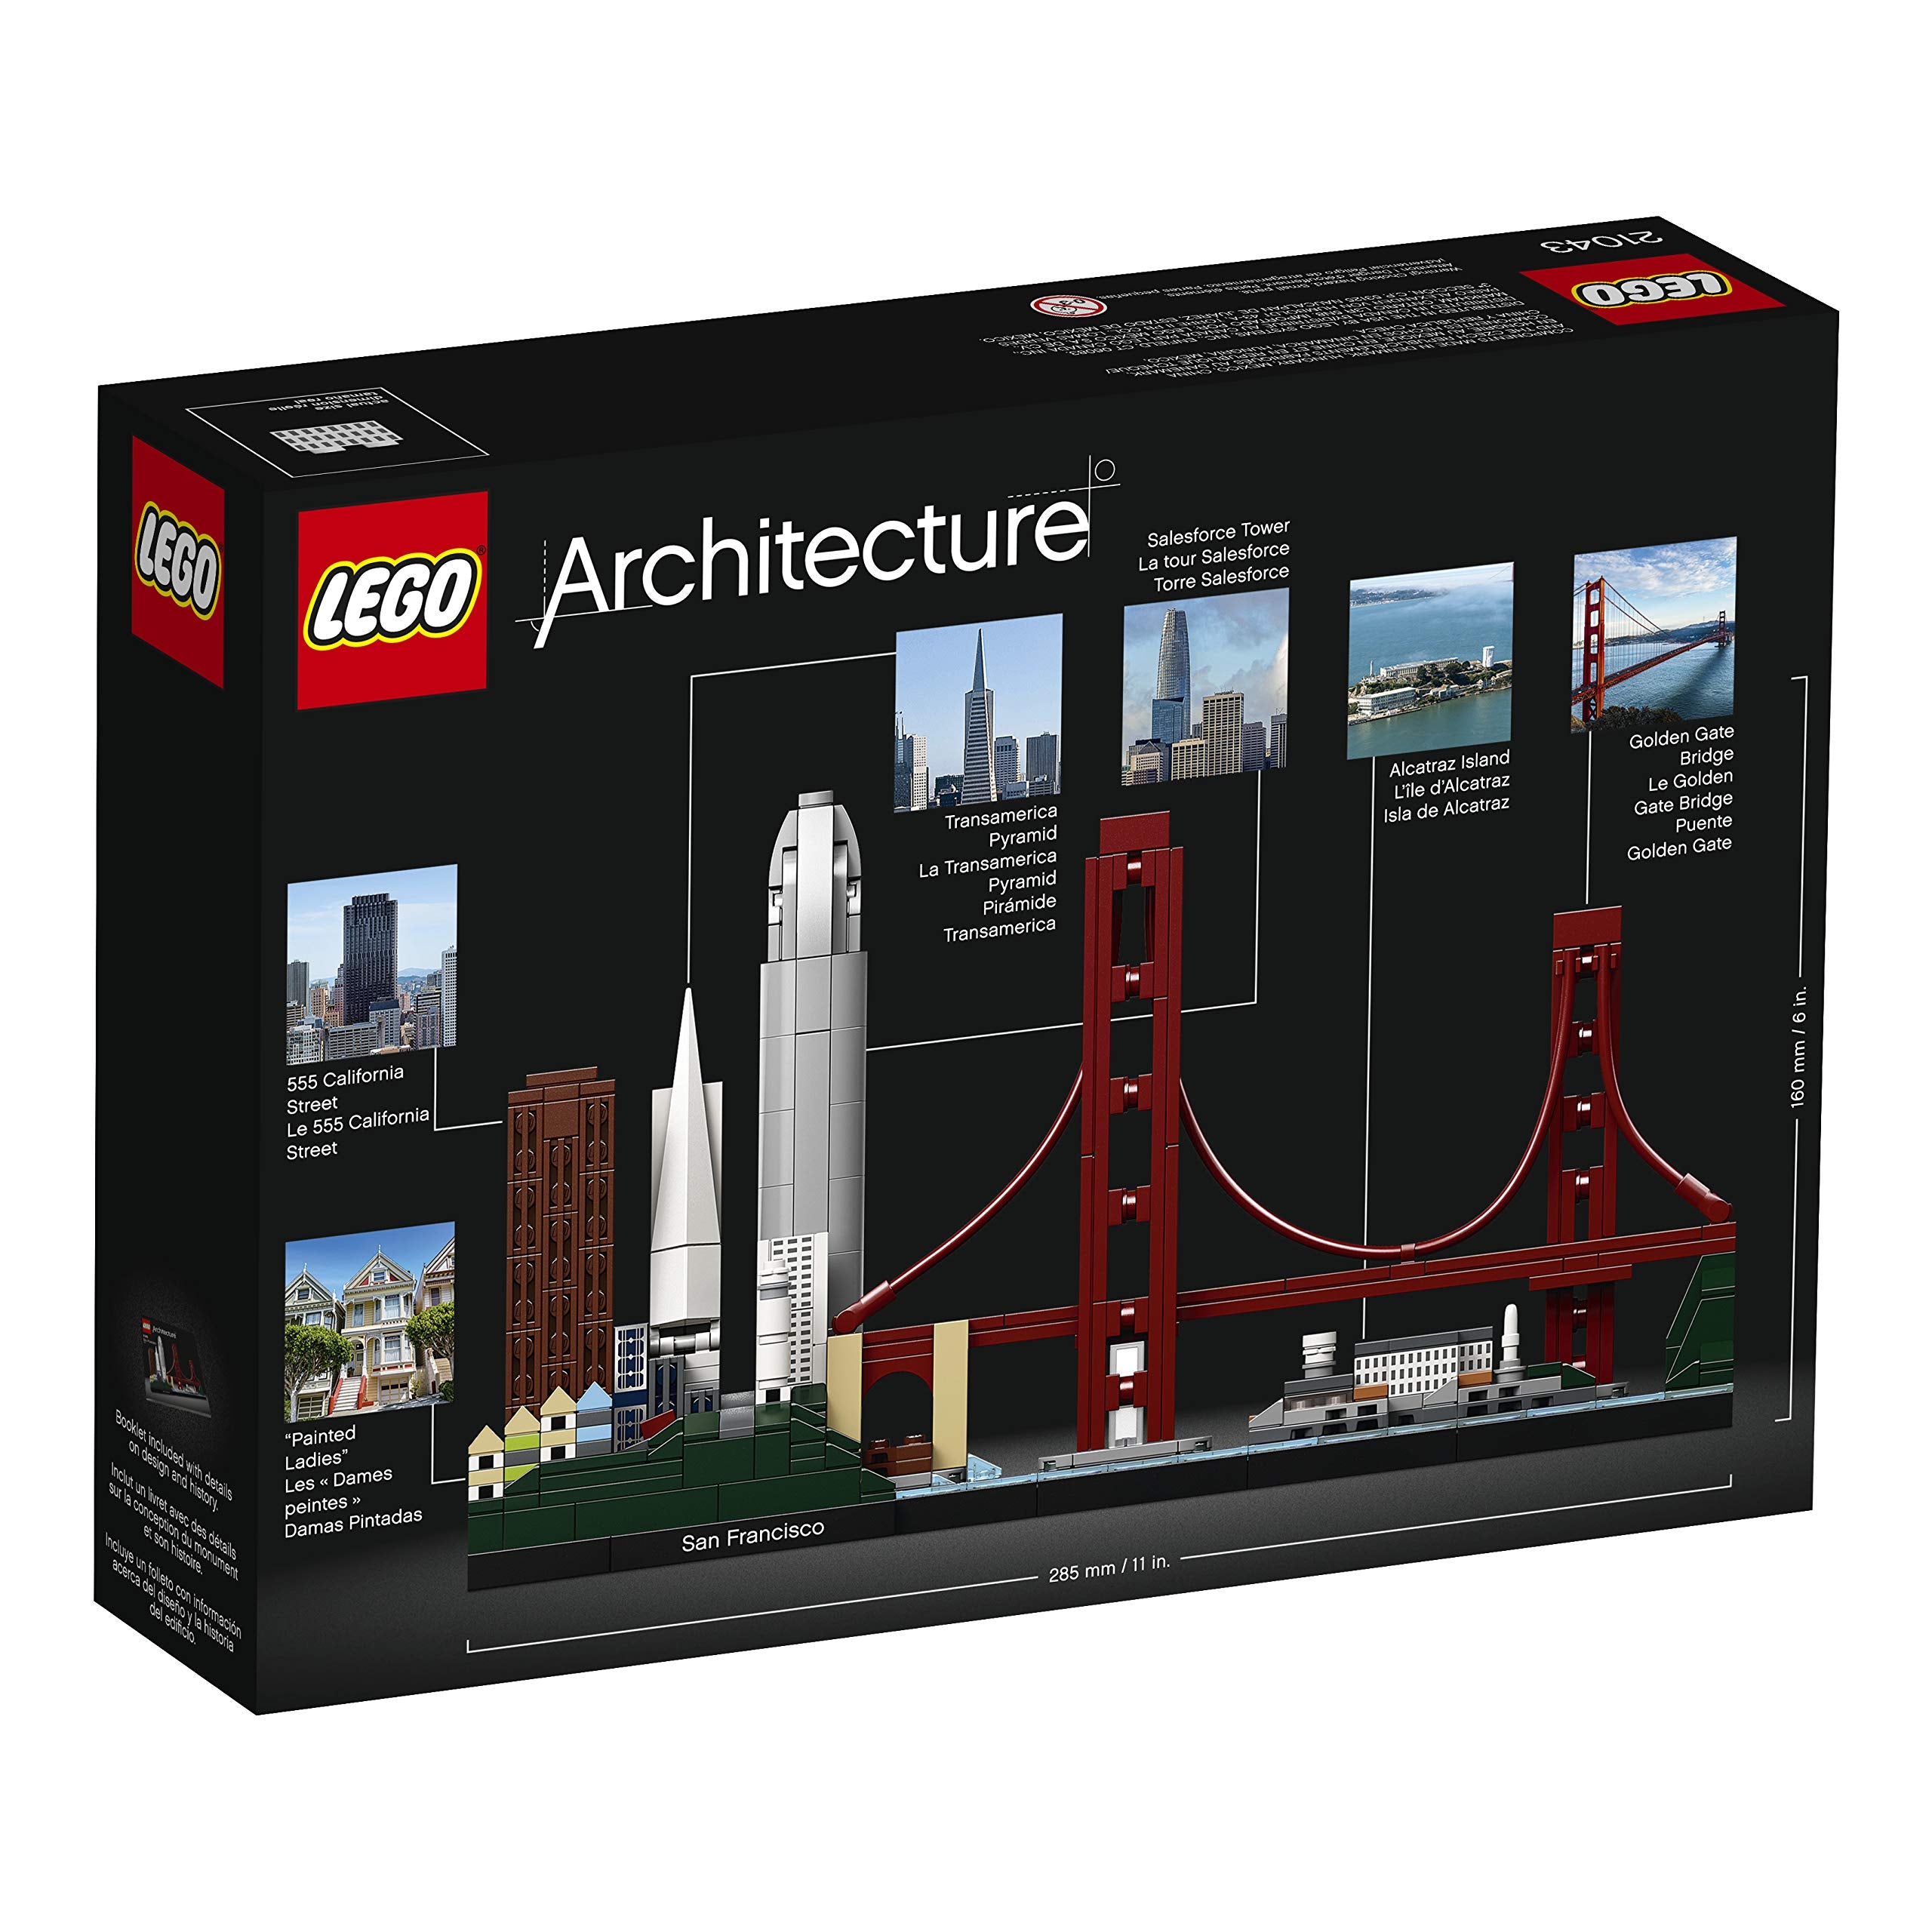 LEGO Architecture Skyline Collection 21043 San Francisco Building Kit (565 Piece) (Like New, Open Box)